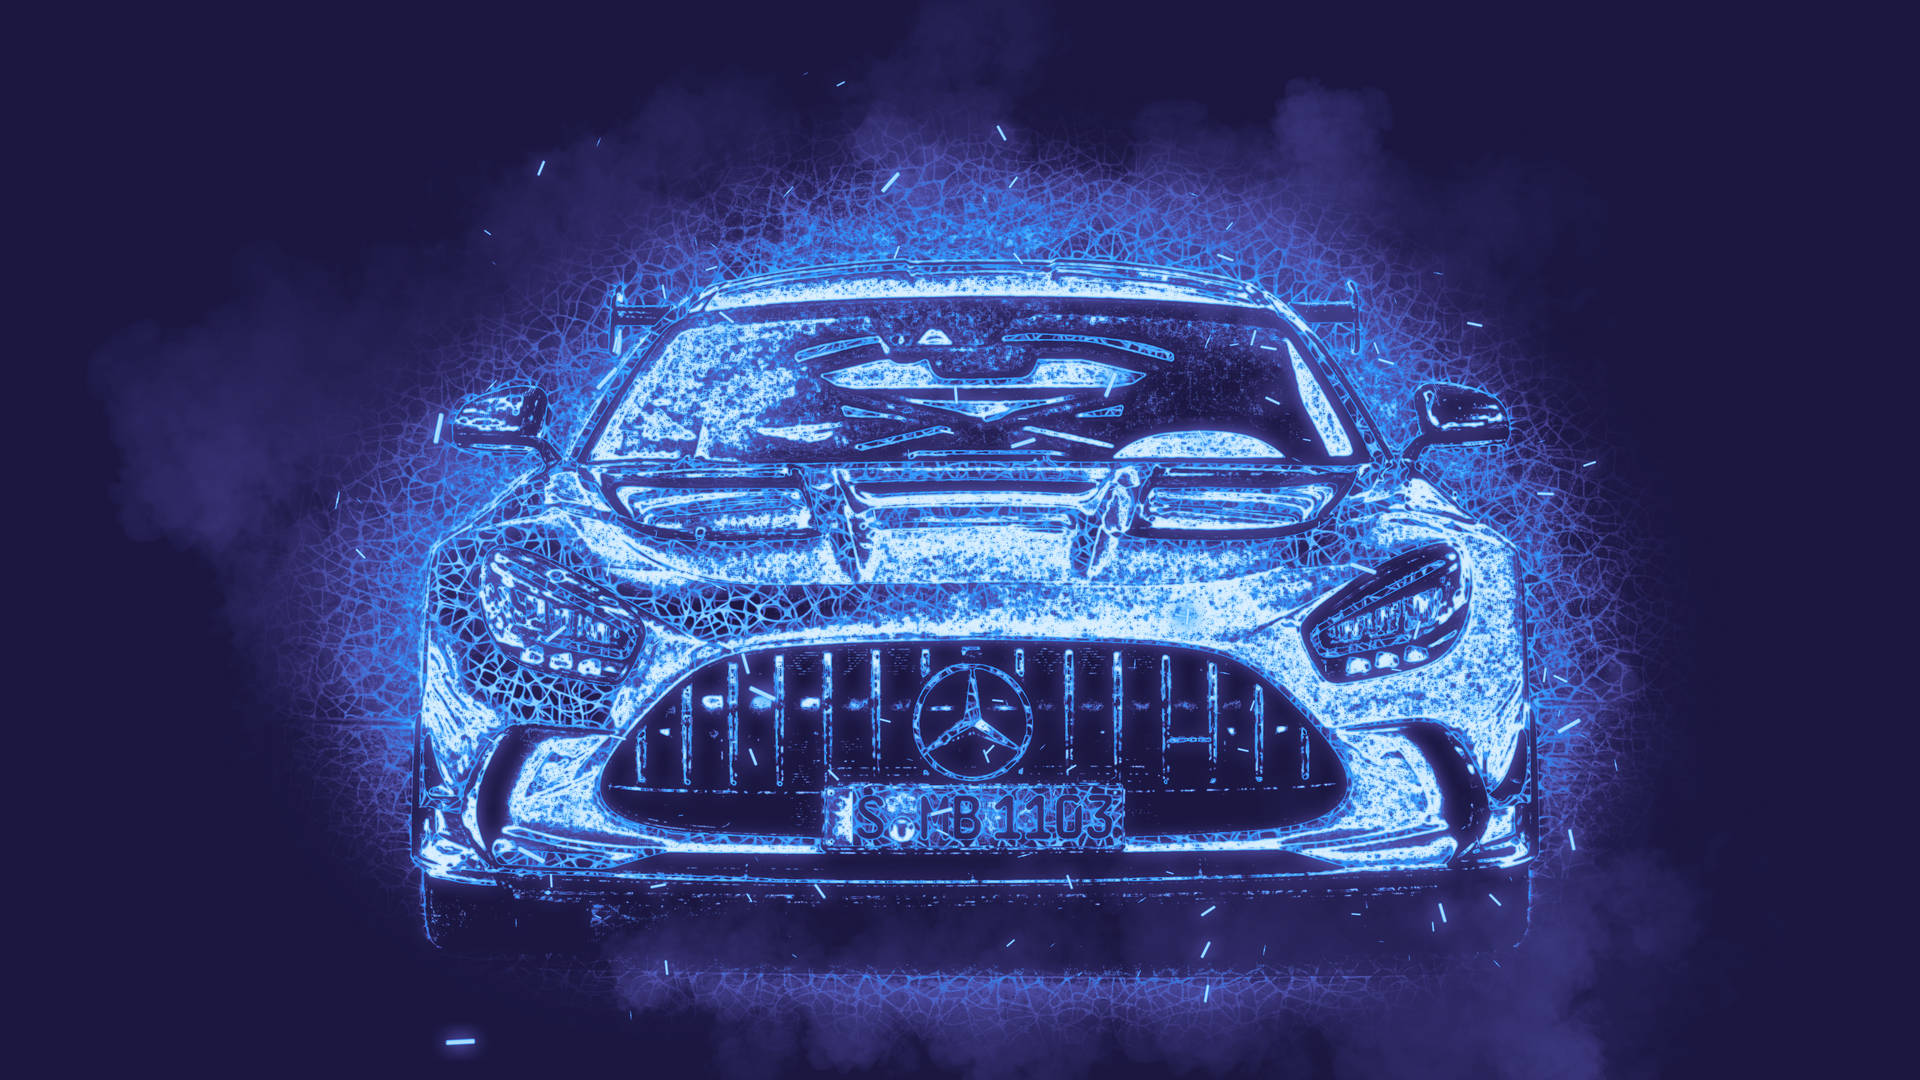 Mercedes Benz Awesome Photoshop Wallpaper